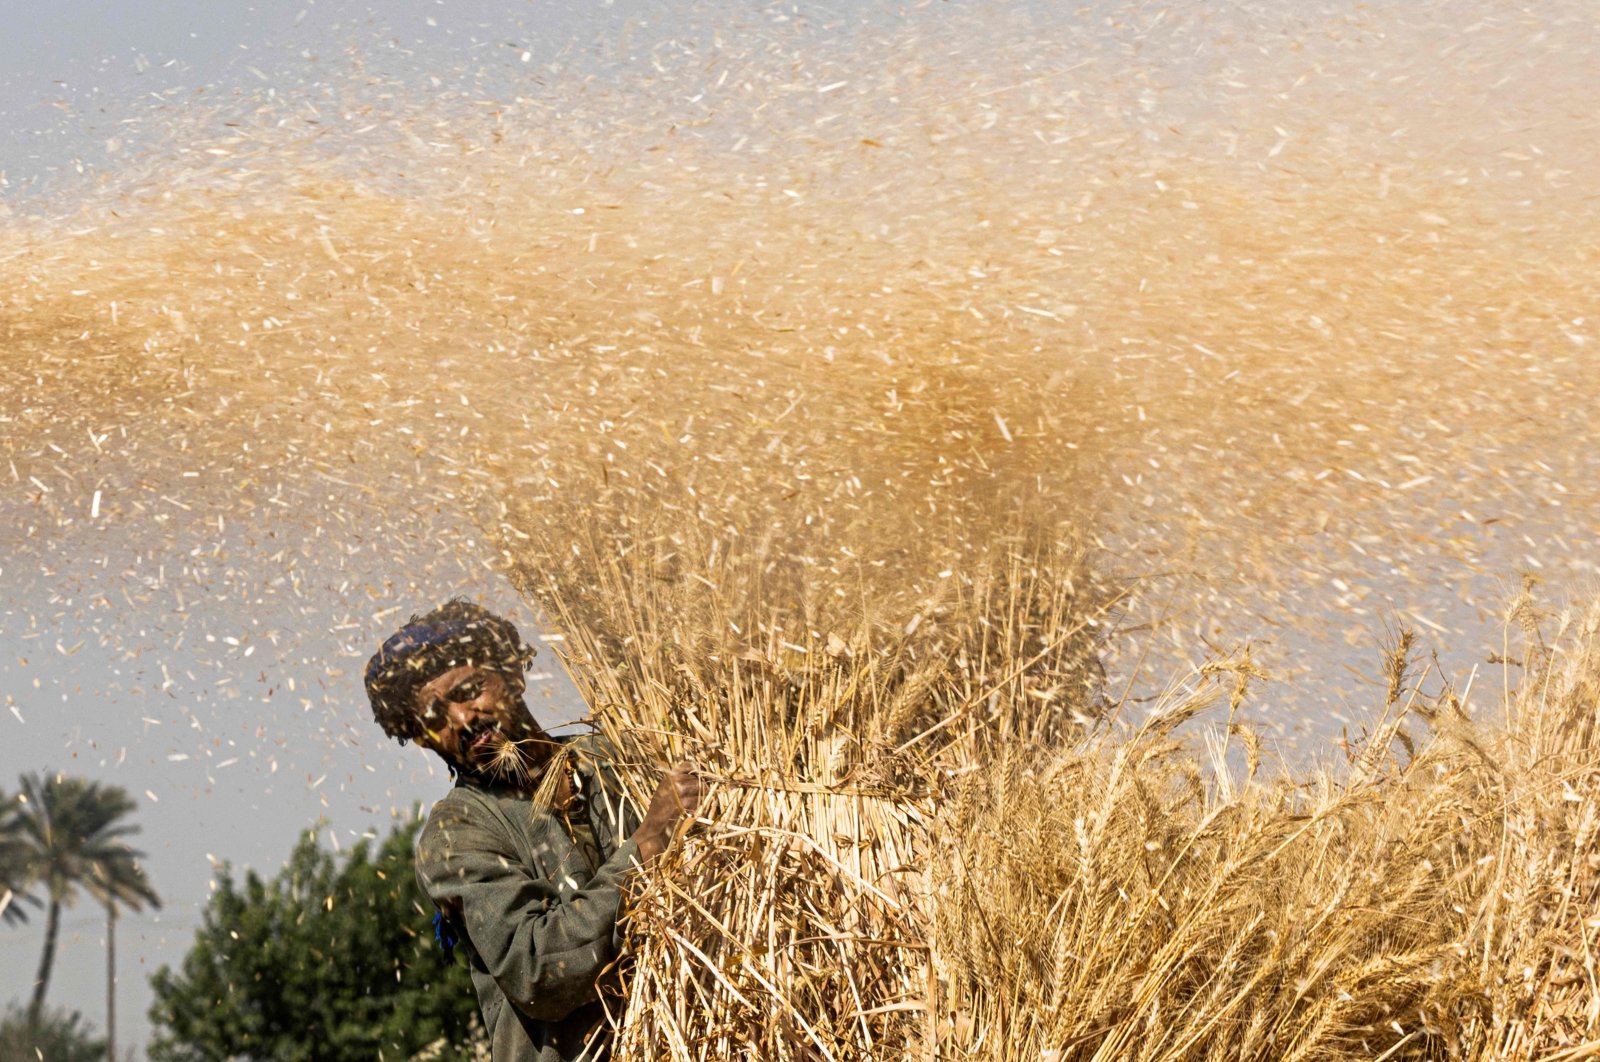 An Egyptian farmer takes part in wheat harvest in Bamha village near the al-Ayyat town in Giza province, some 60 kilometers south of the capital Cairo, Egypt, May 17, 2022. (AFP Photo)